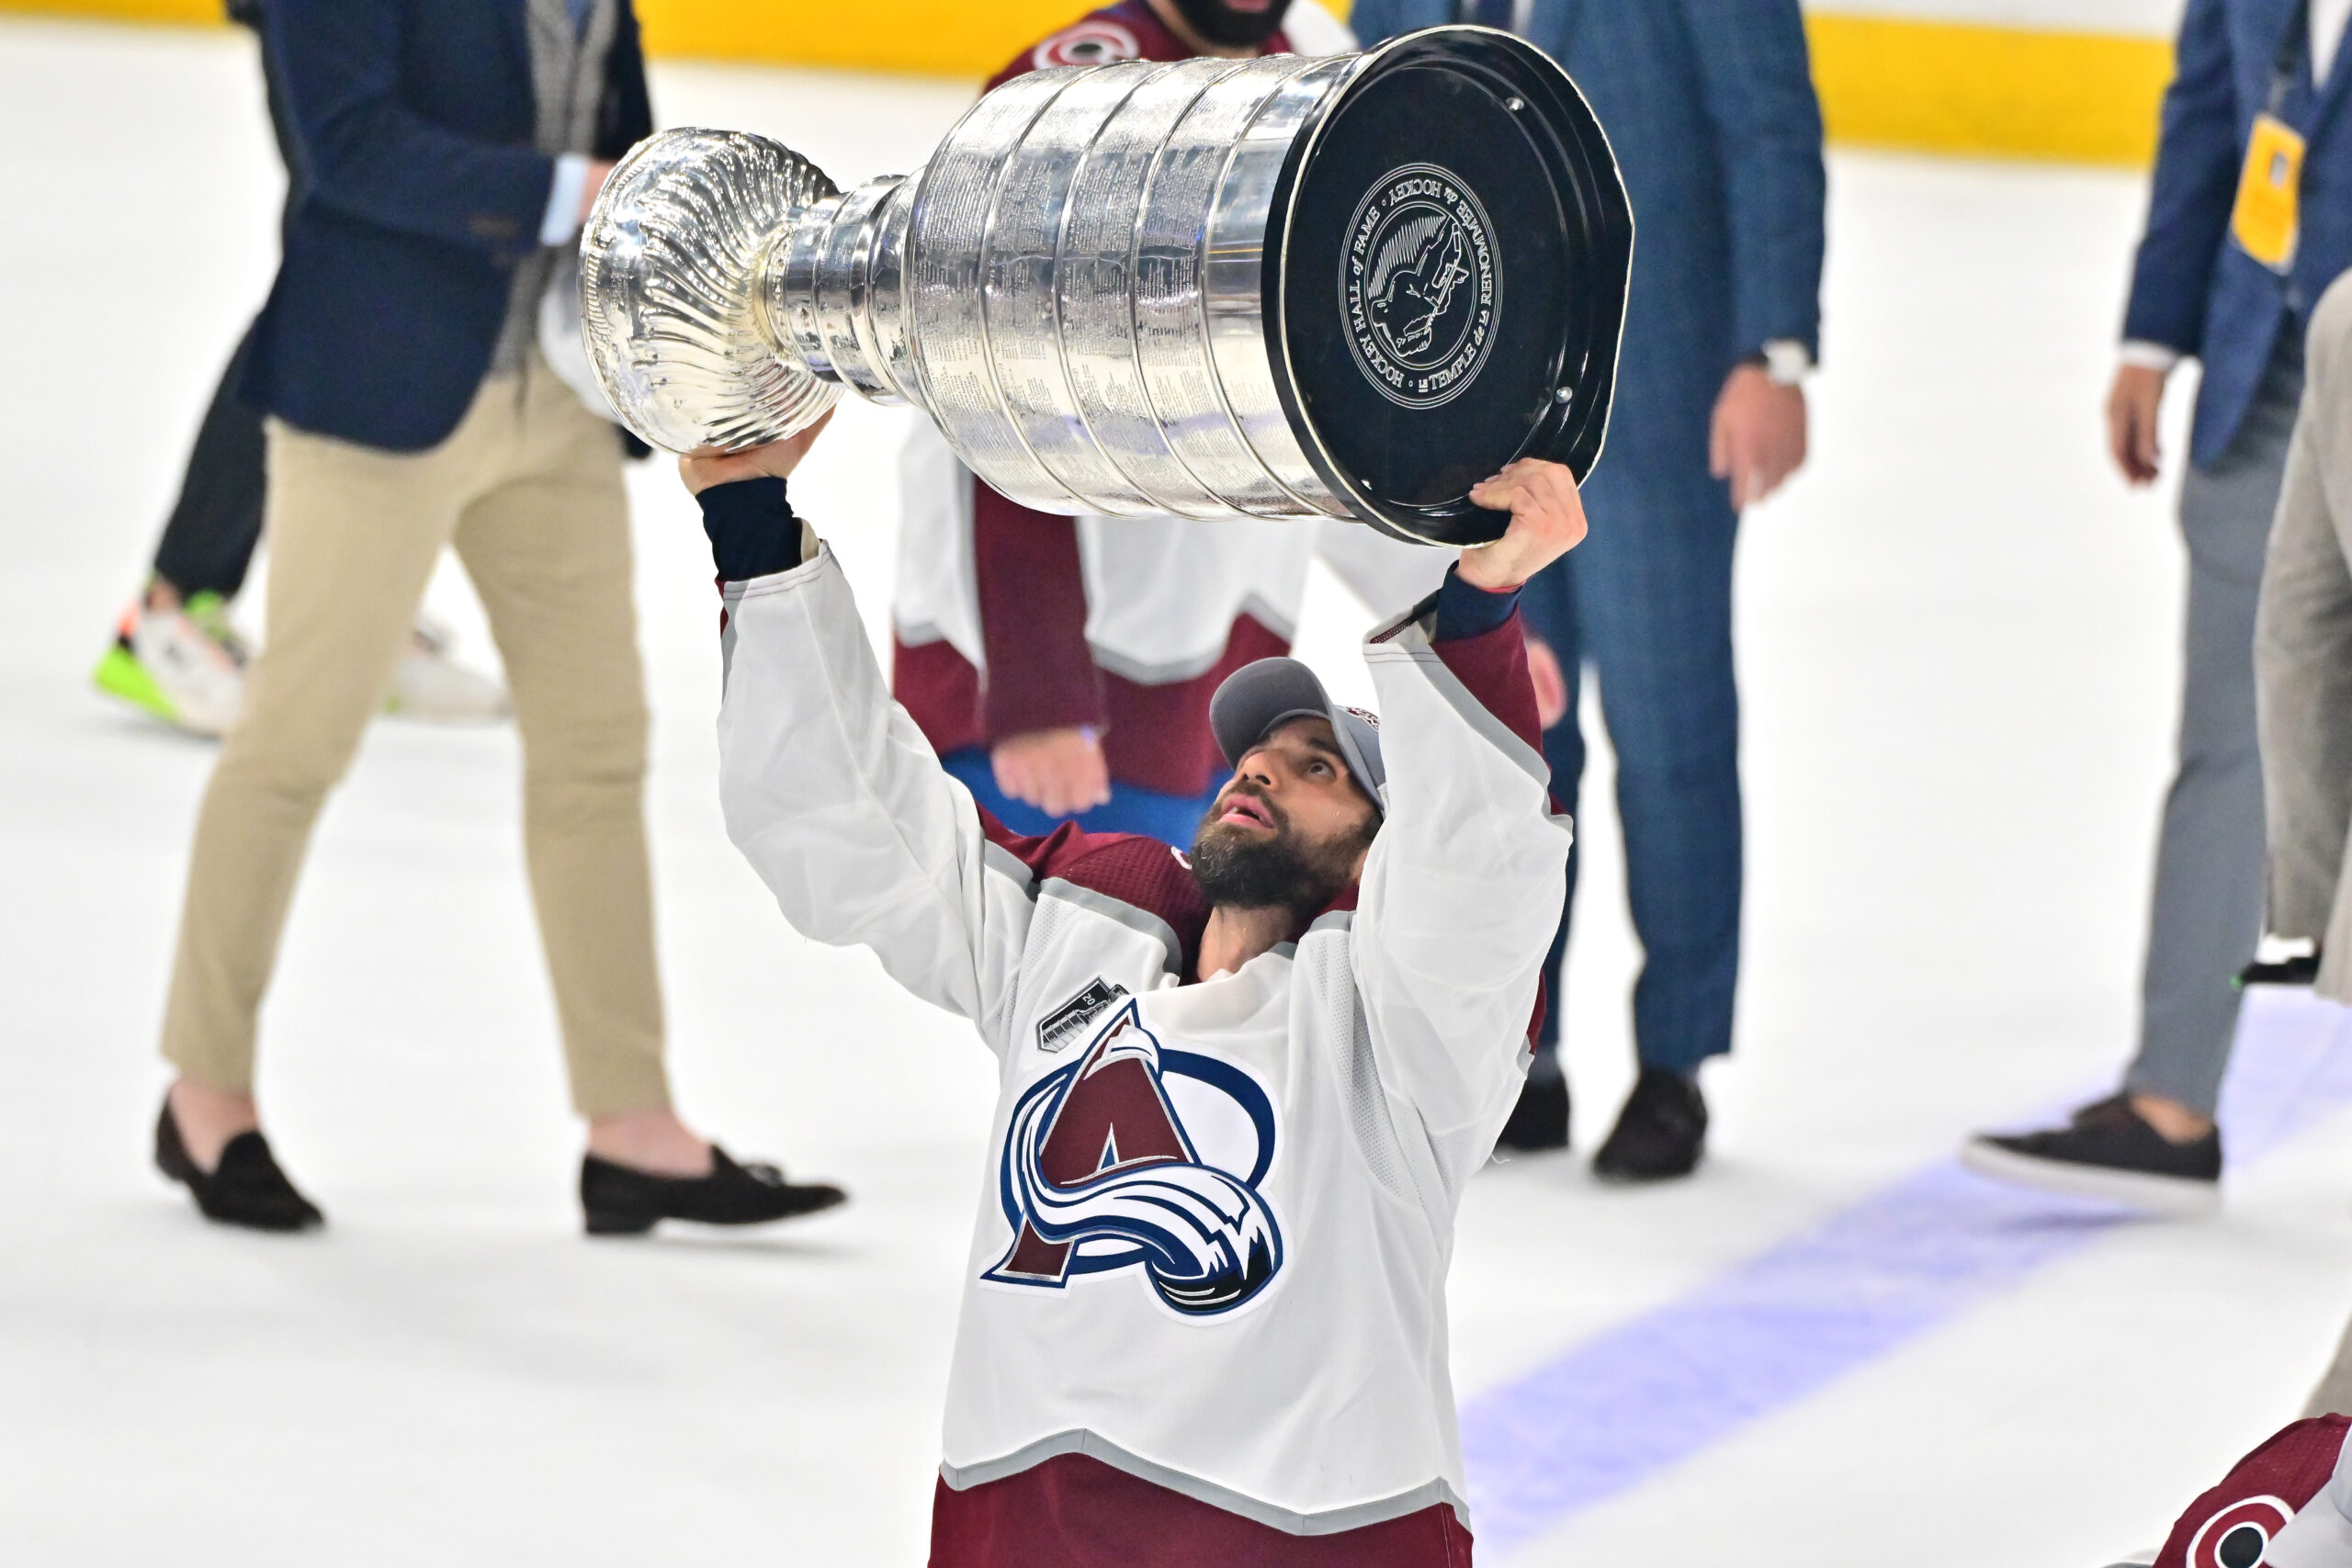 I guess it's a new record': Avalanche dents Stanley Cup minutes after  winning